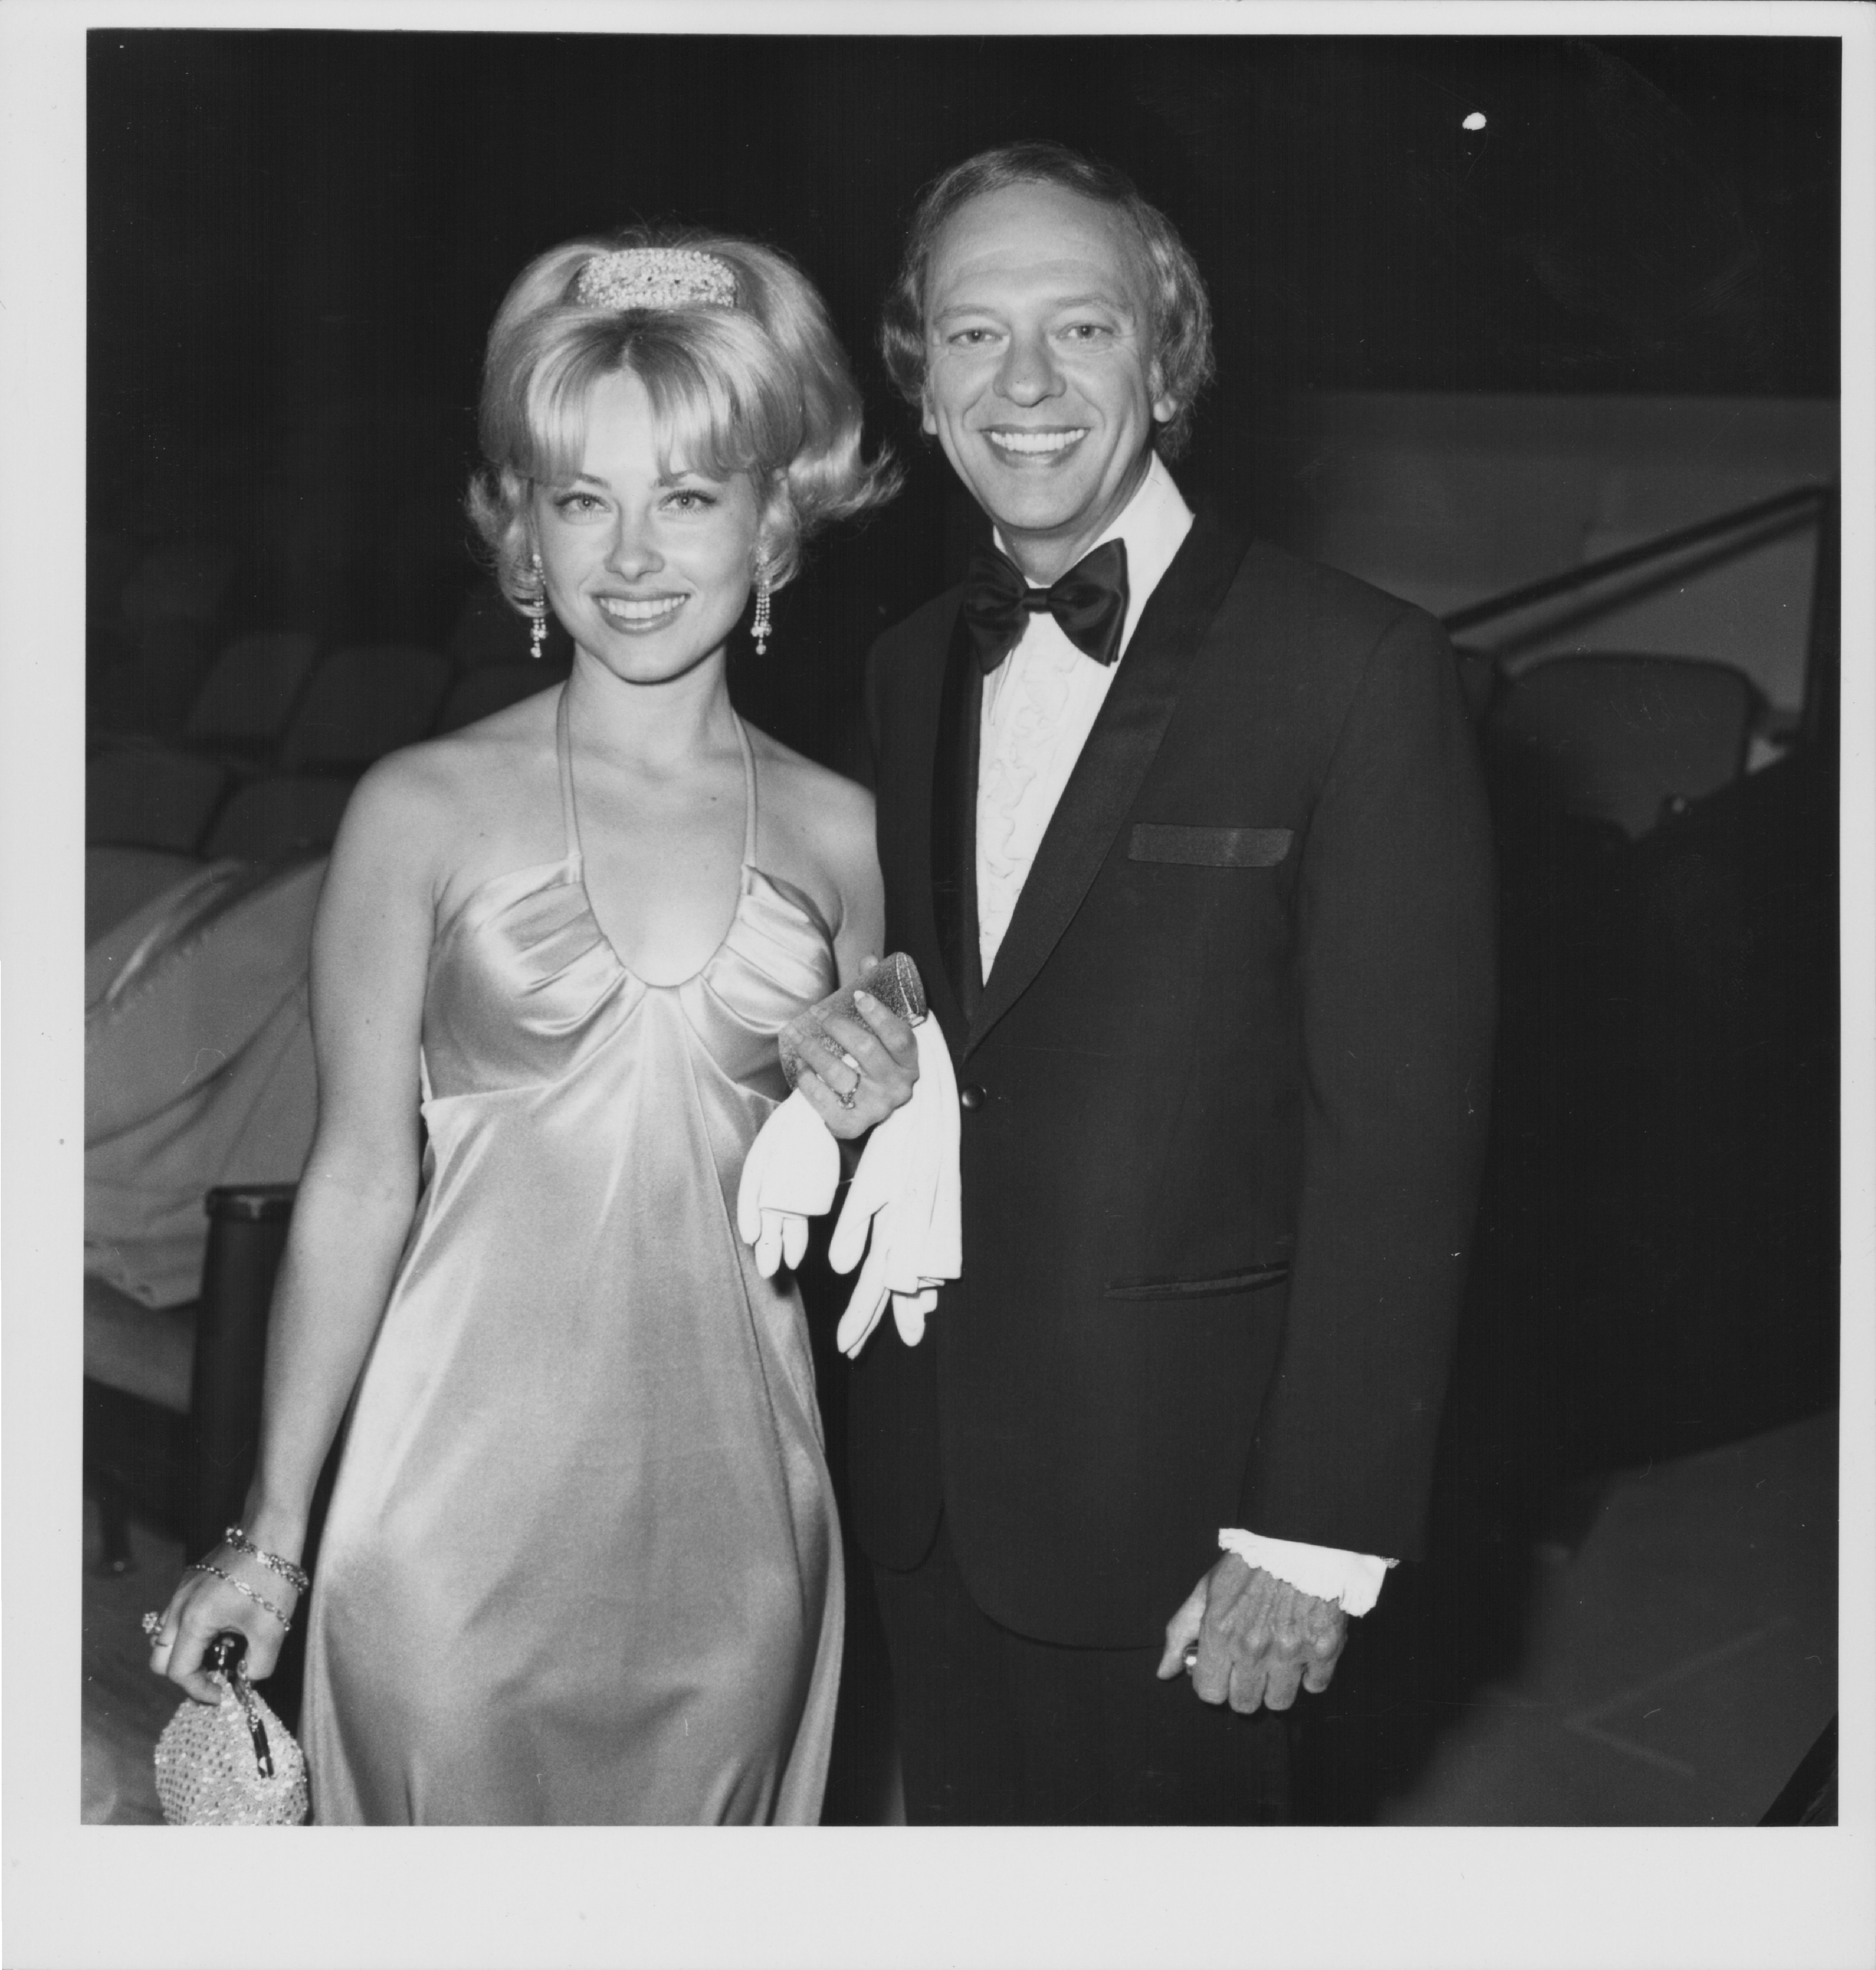 Actor Don Knotts with his wife Loralee Czuchna, attending the Los Angeles Television Awards, 1975. | Source: Getty Images